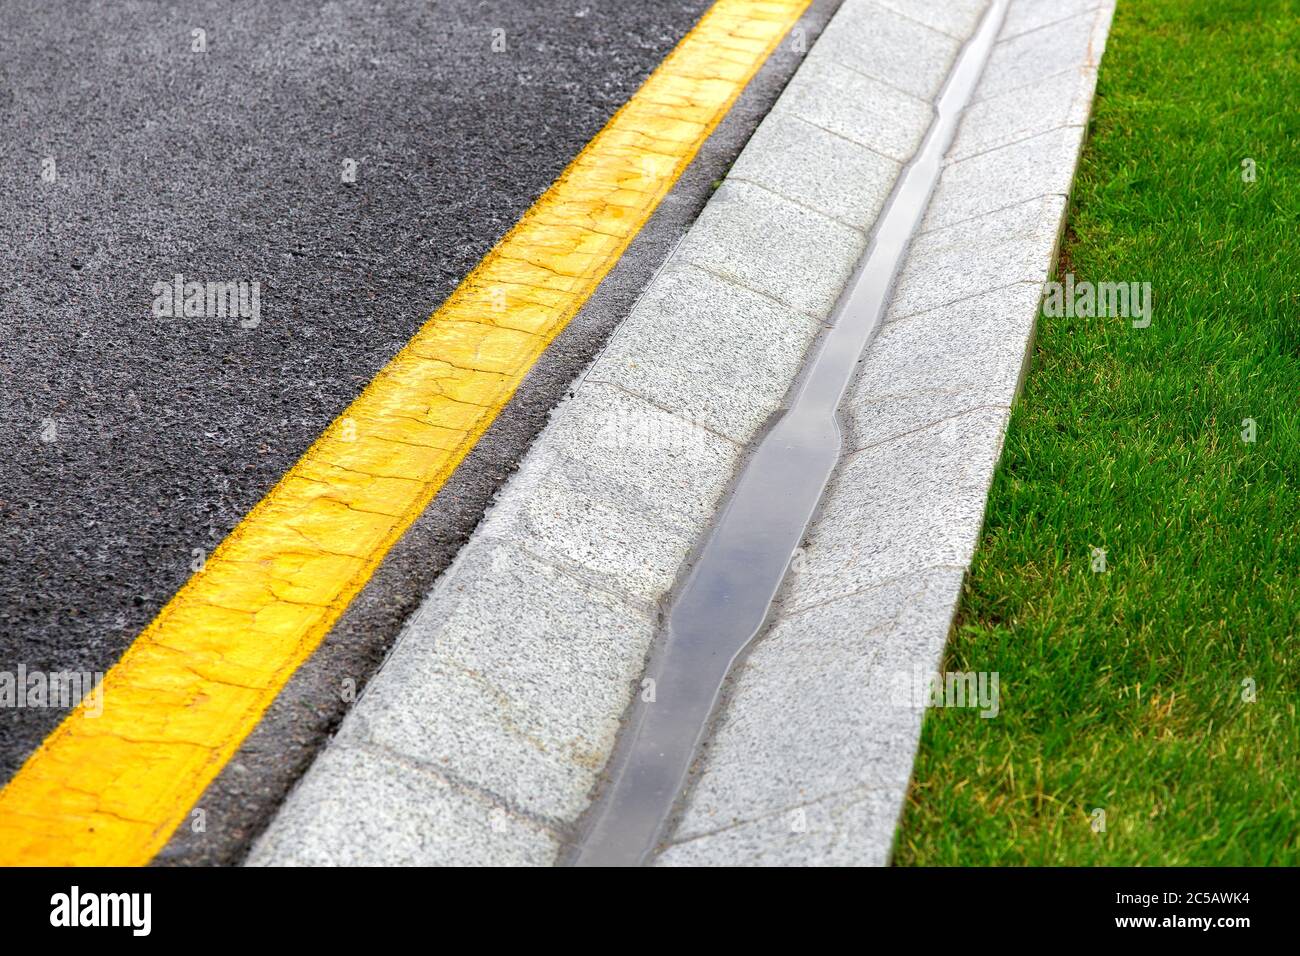 drainage edge tray with stream rain near an asphalt road with a yellow marking and a green lawn after rain Stock - Alamy